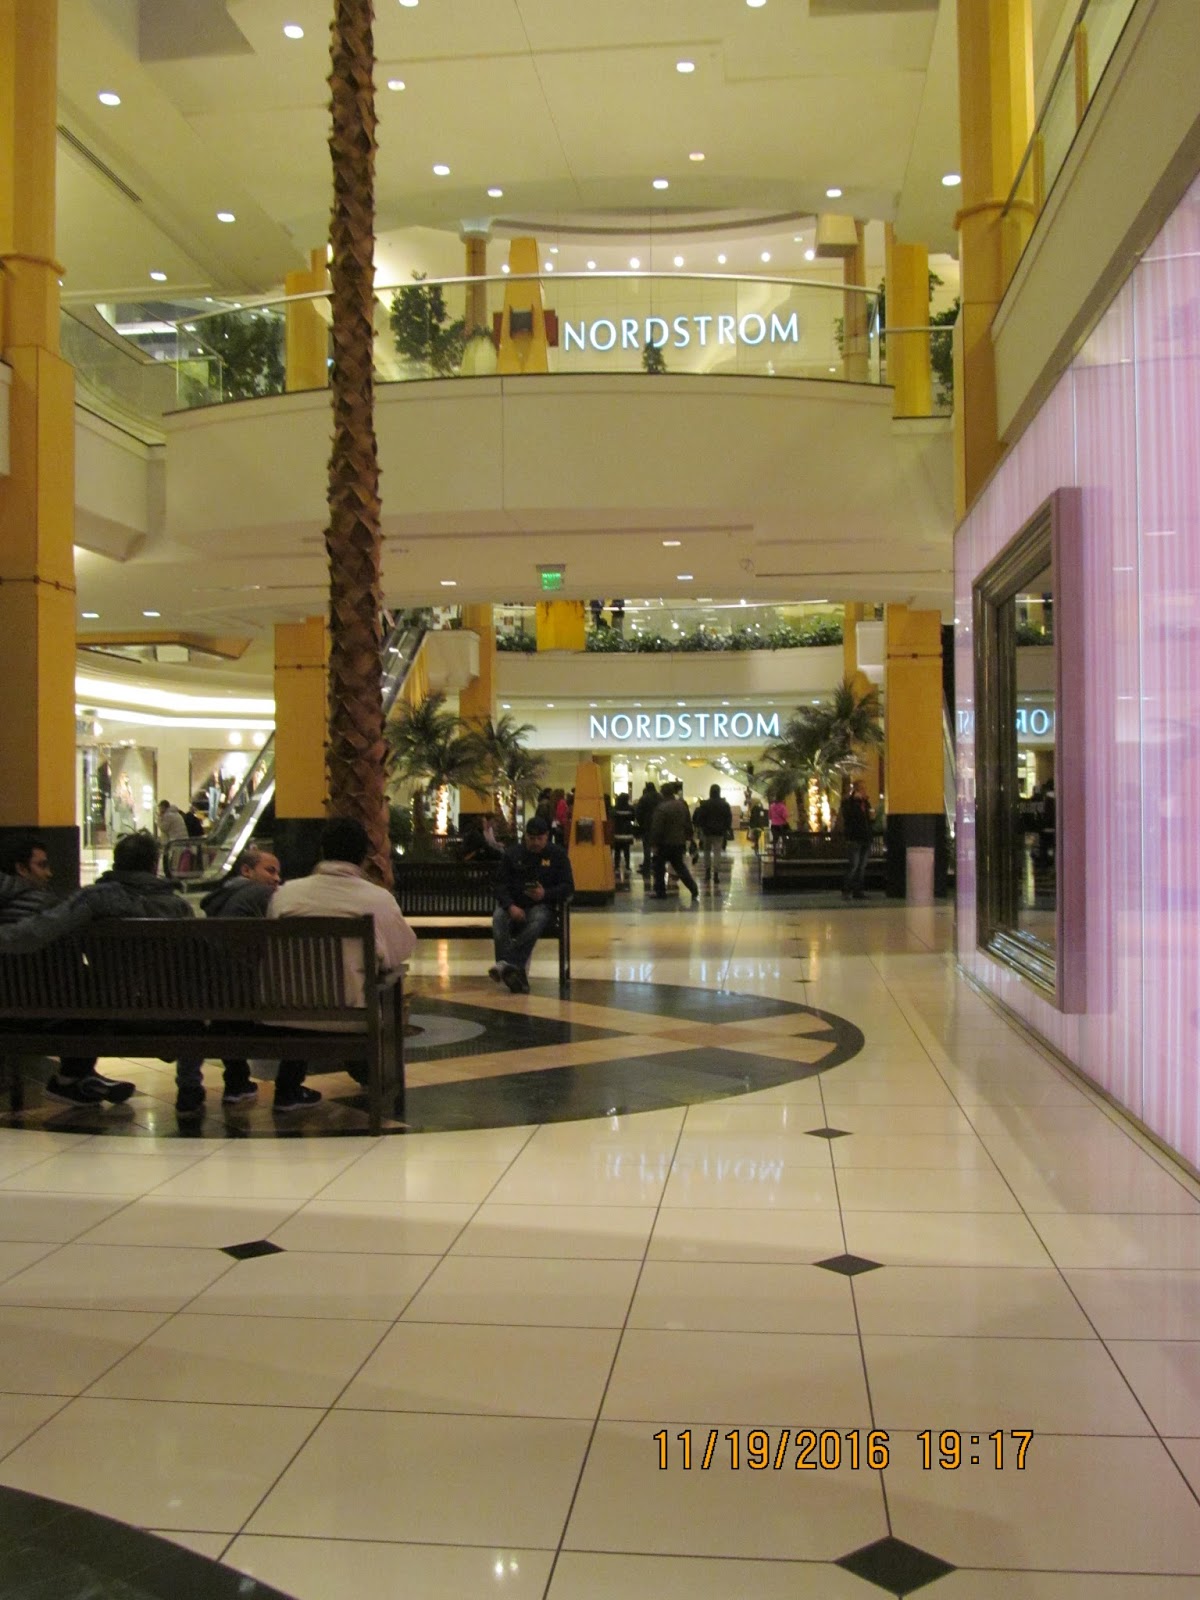 Great luxury mall! - Review of Somerset Collection, Troy, MI